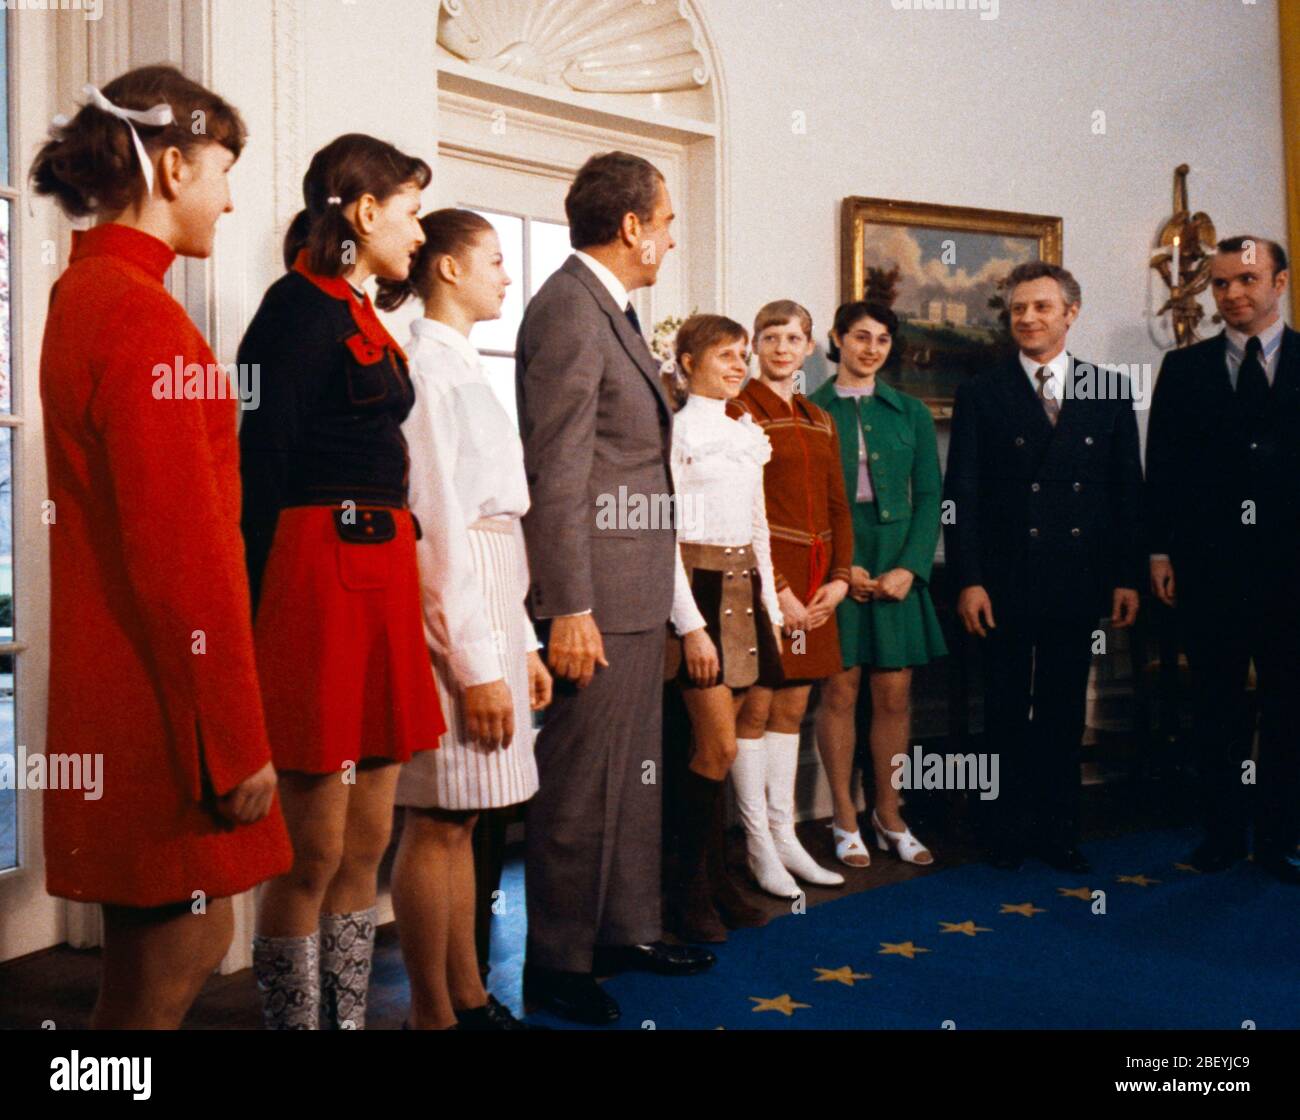 President Richard Nixon Standing in the Oval Office with Members of the Russian Soviet Women's Gymnastics Team, Olympic Gold Medalist Olga Korbut Stands next to Richard Nixon 3 21 1973 Stock Photo